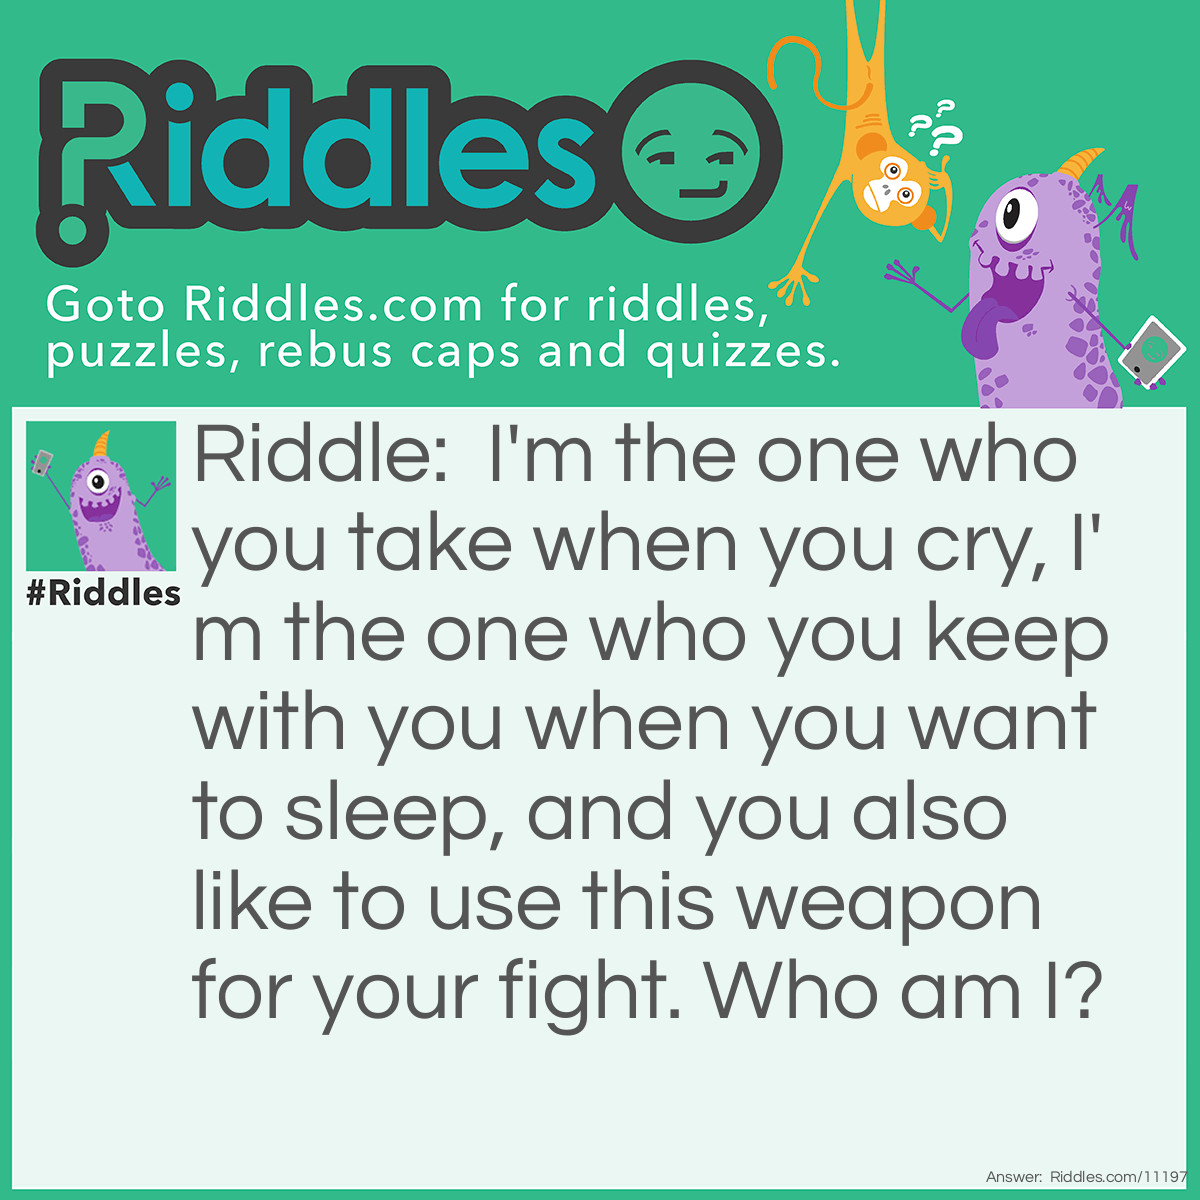 Riddle: I'm the one who you take when you cry, I'm the one who you keep with you when you want to sleep, and you also like to use this weapon for your fight. Who am I? Answer: The answer is a teddy bear.